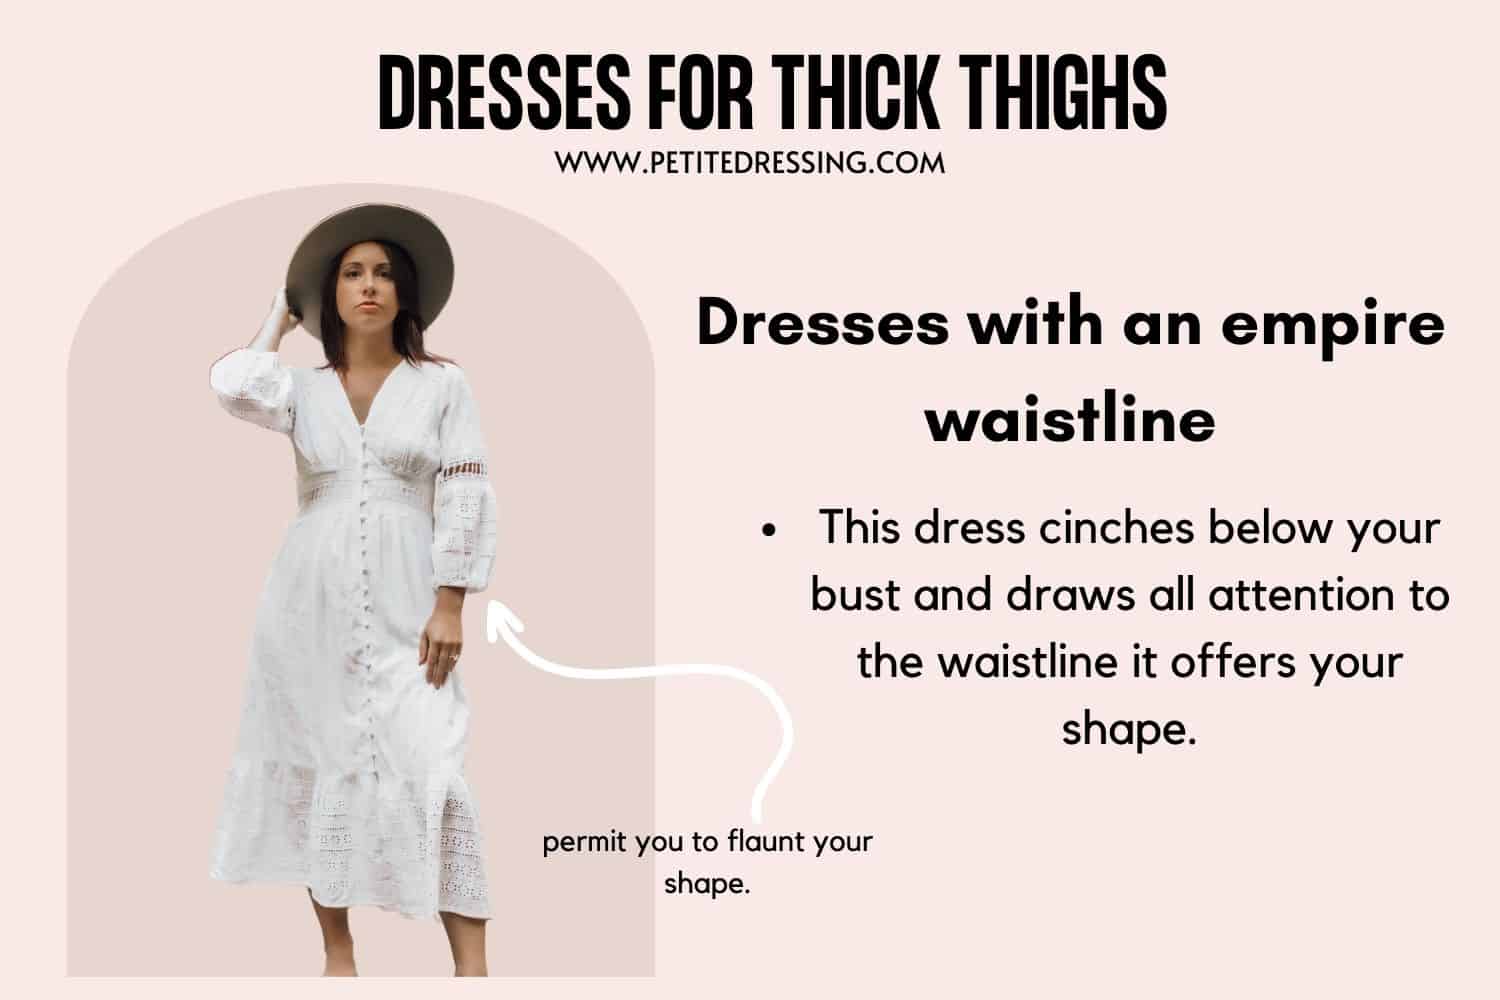 The Dress Guide for Women with Thick Thighs